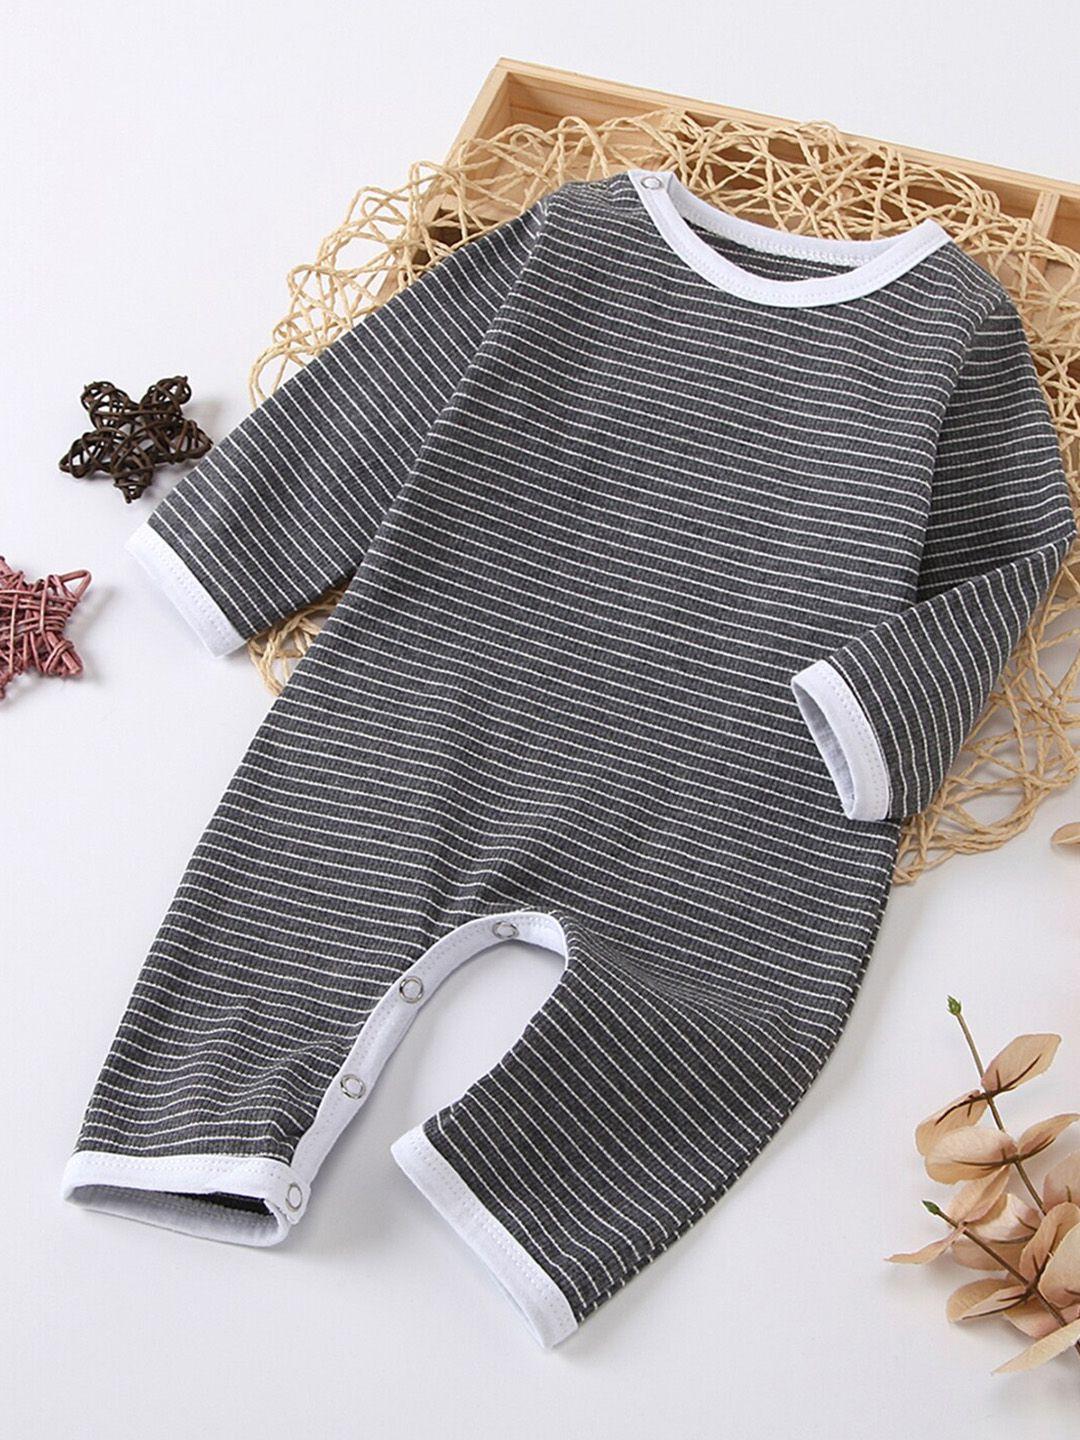 StyleCast Girls Striped Cotton Rompers